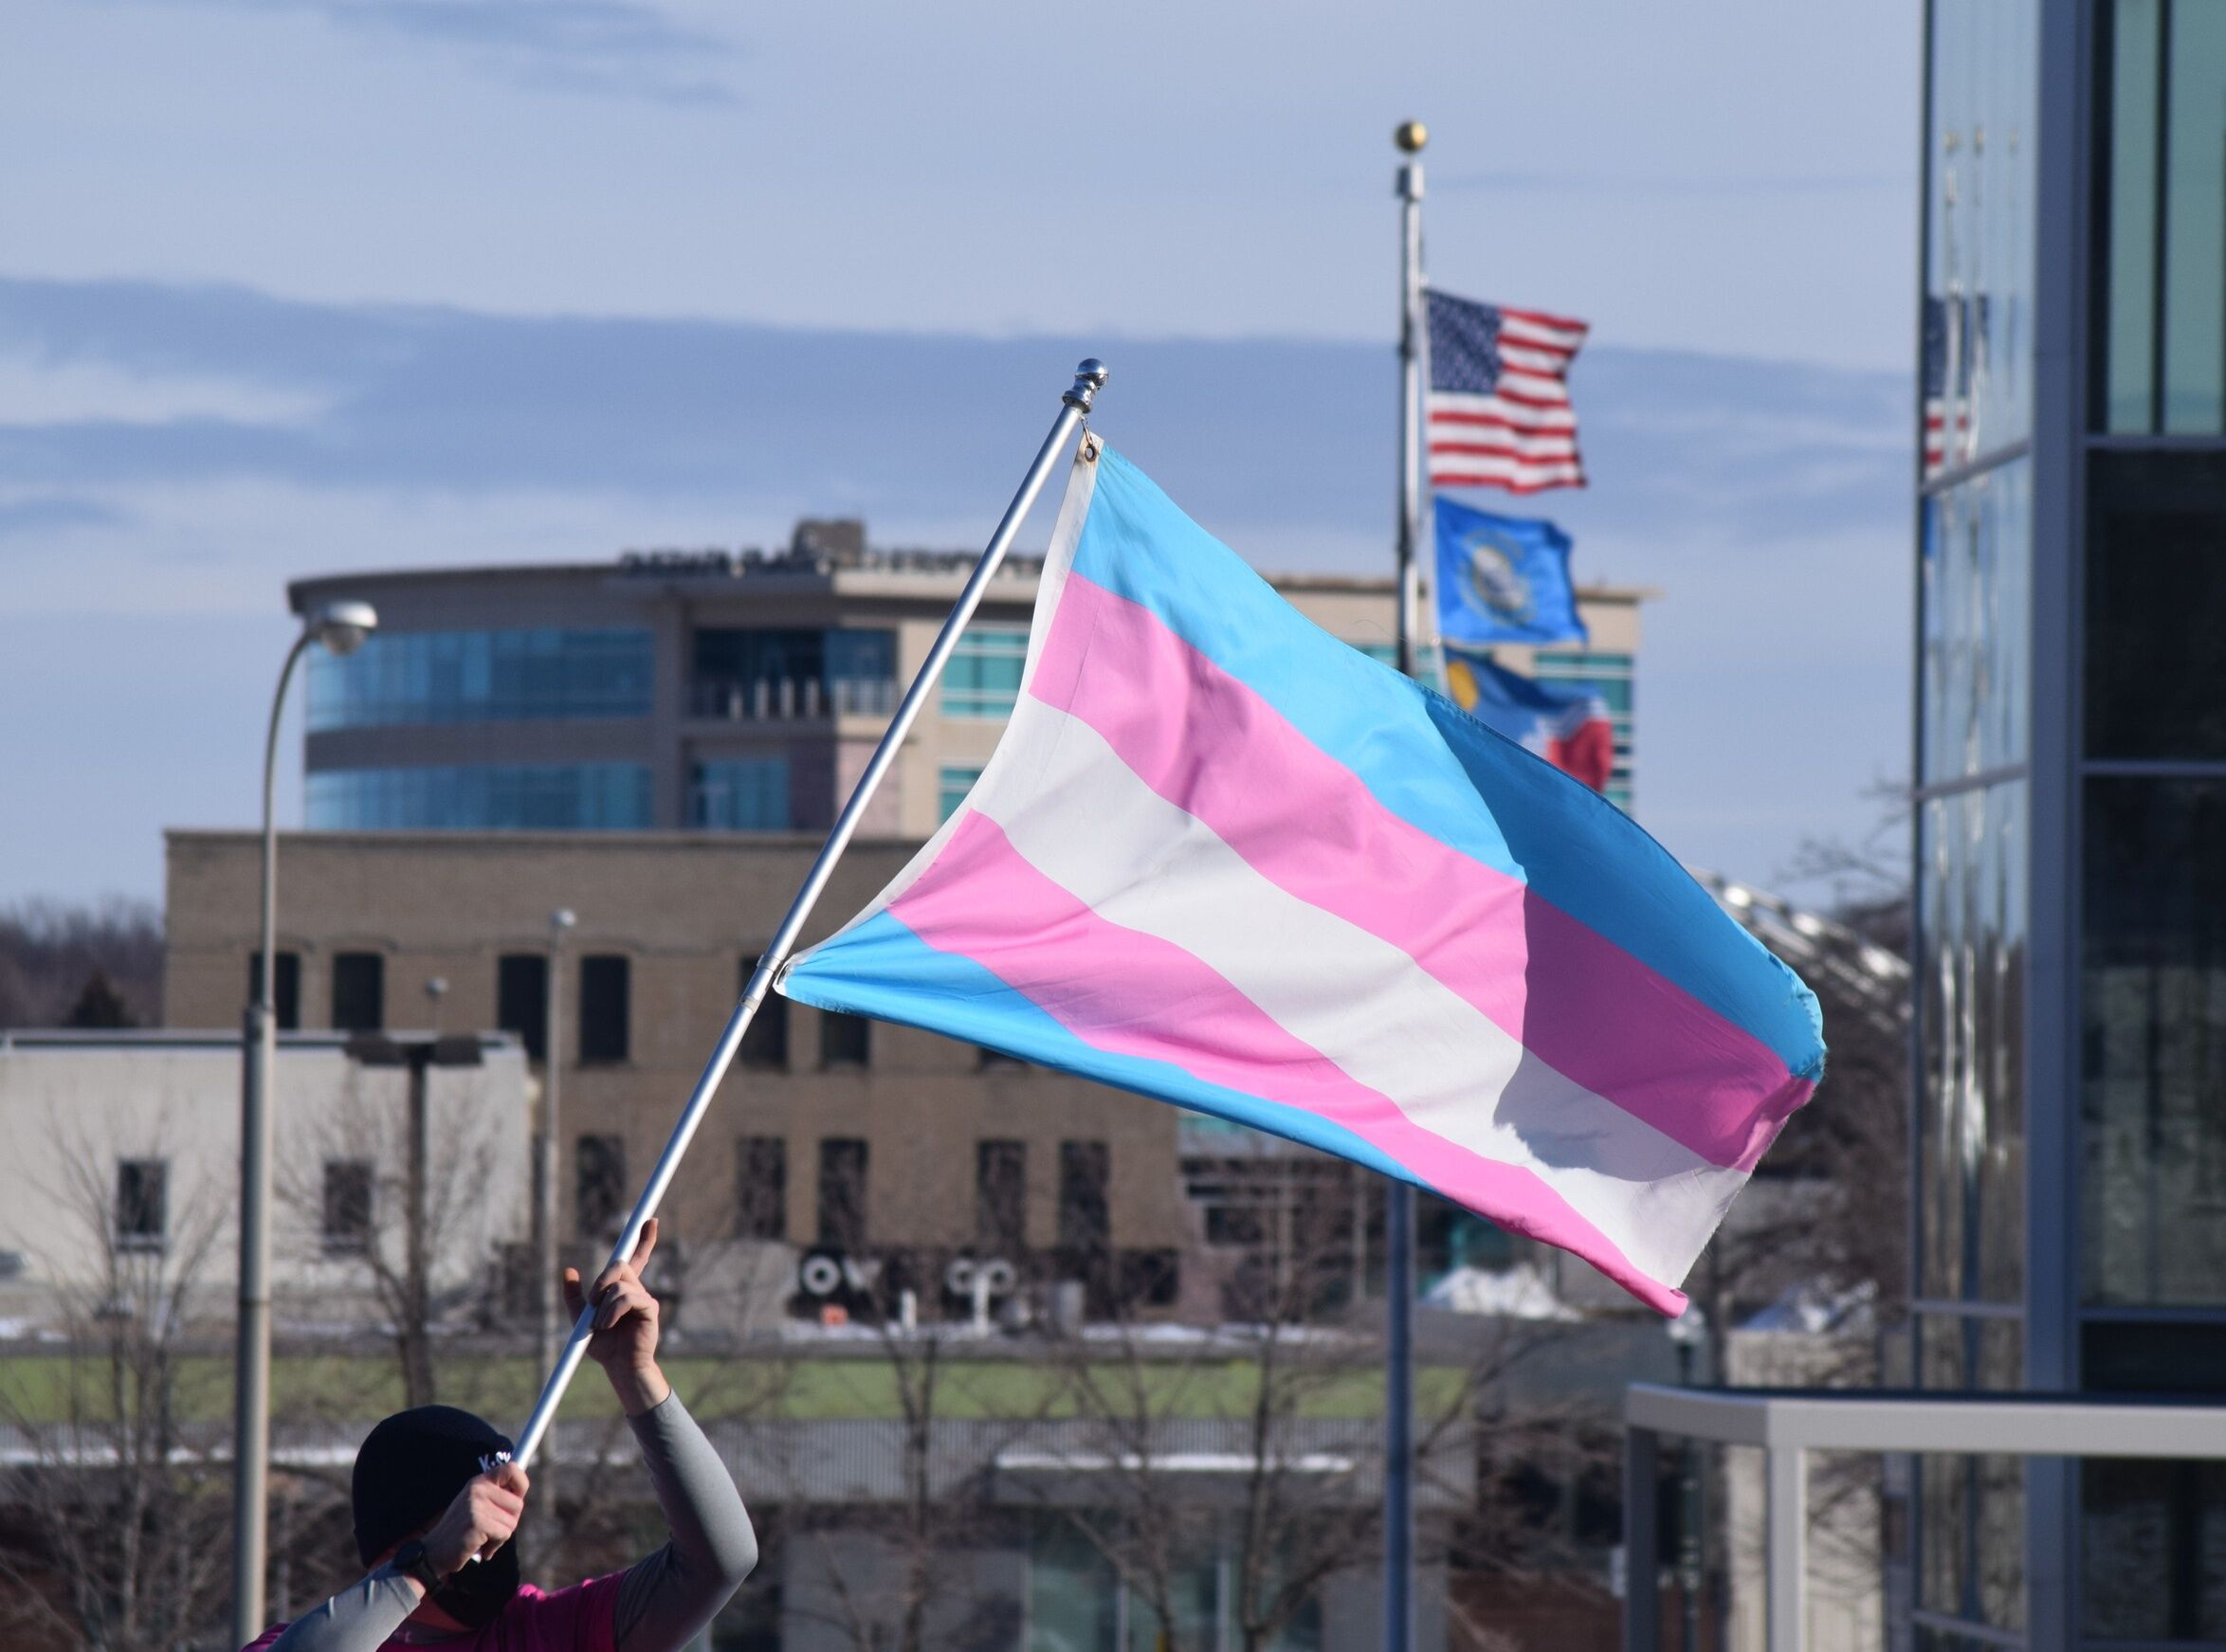 A protester holds a transgender pride flag in downtown Sioux Falls as part of a rally on January 16, 2022 in support of transgender rights